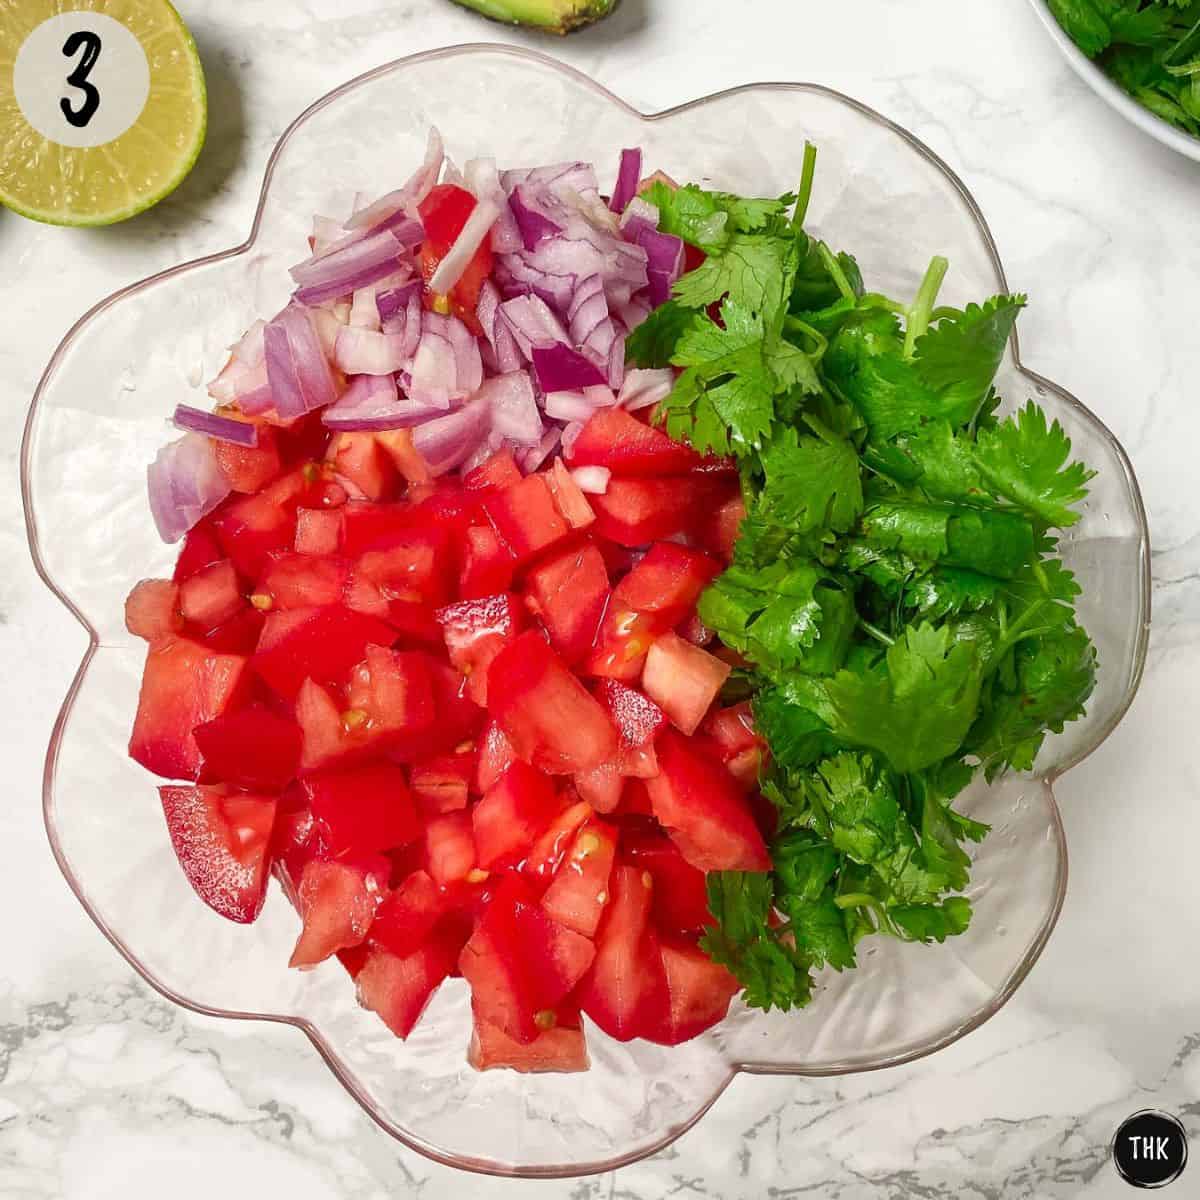 Clear bowl with diced tomato, red onion, and cilantro inside.